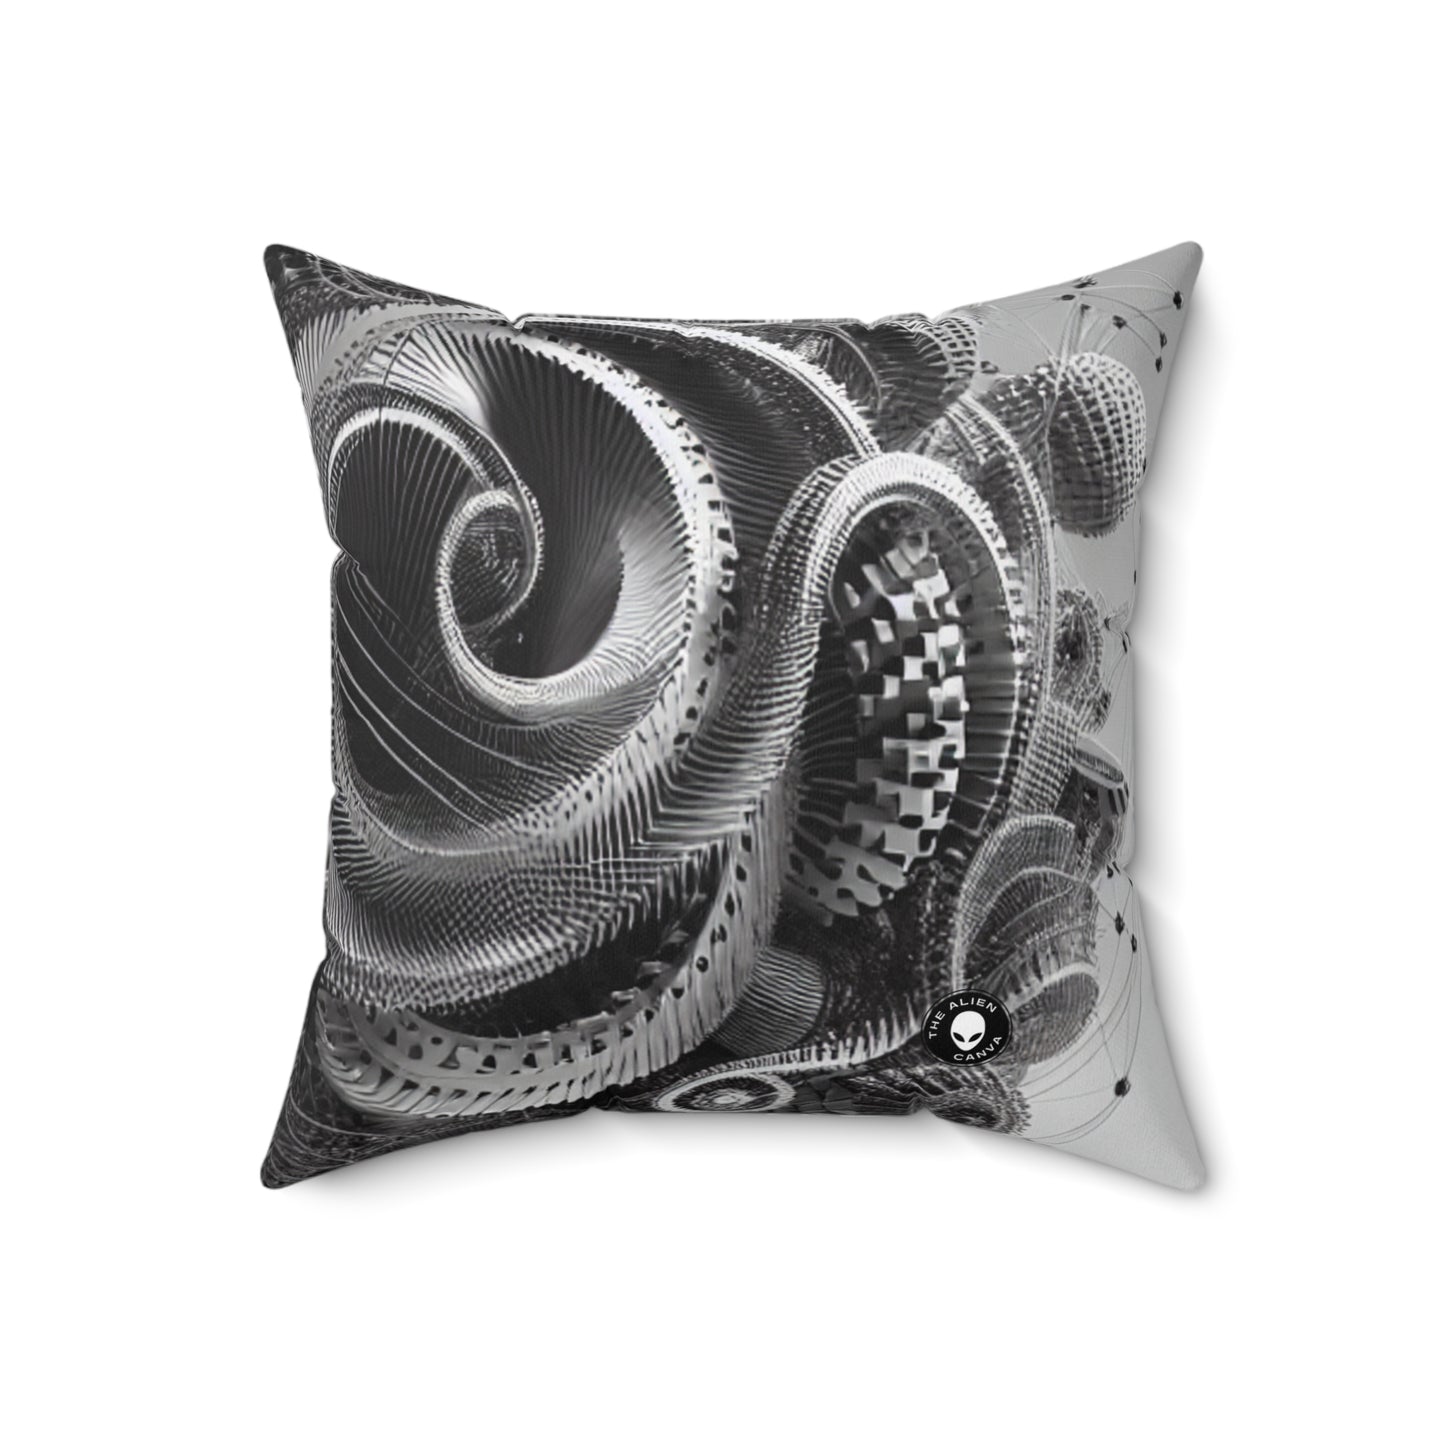 "Serenity in Flight: A Kinetic Avian Sculpture"- The Alien Spun Polyester Square Pillow Kinetic Sculpture